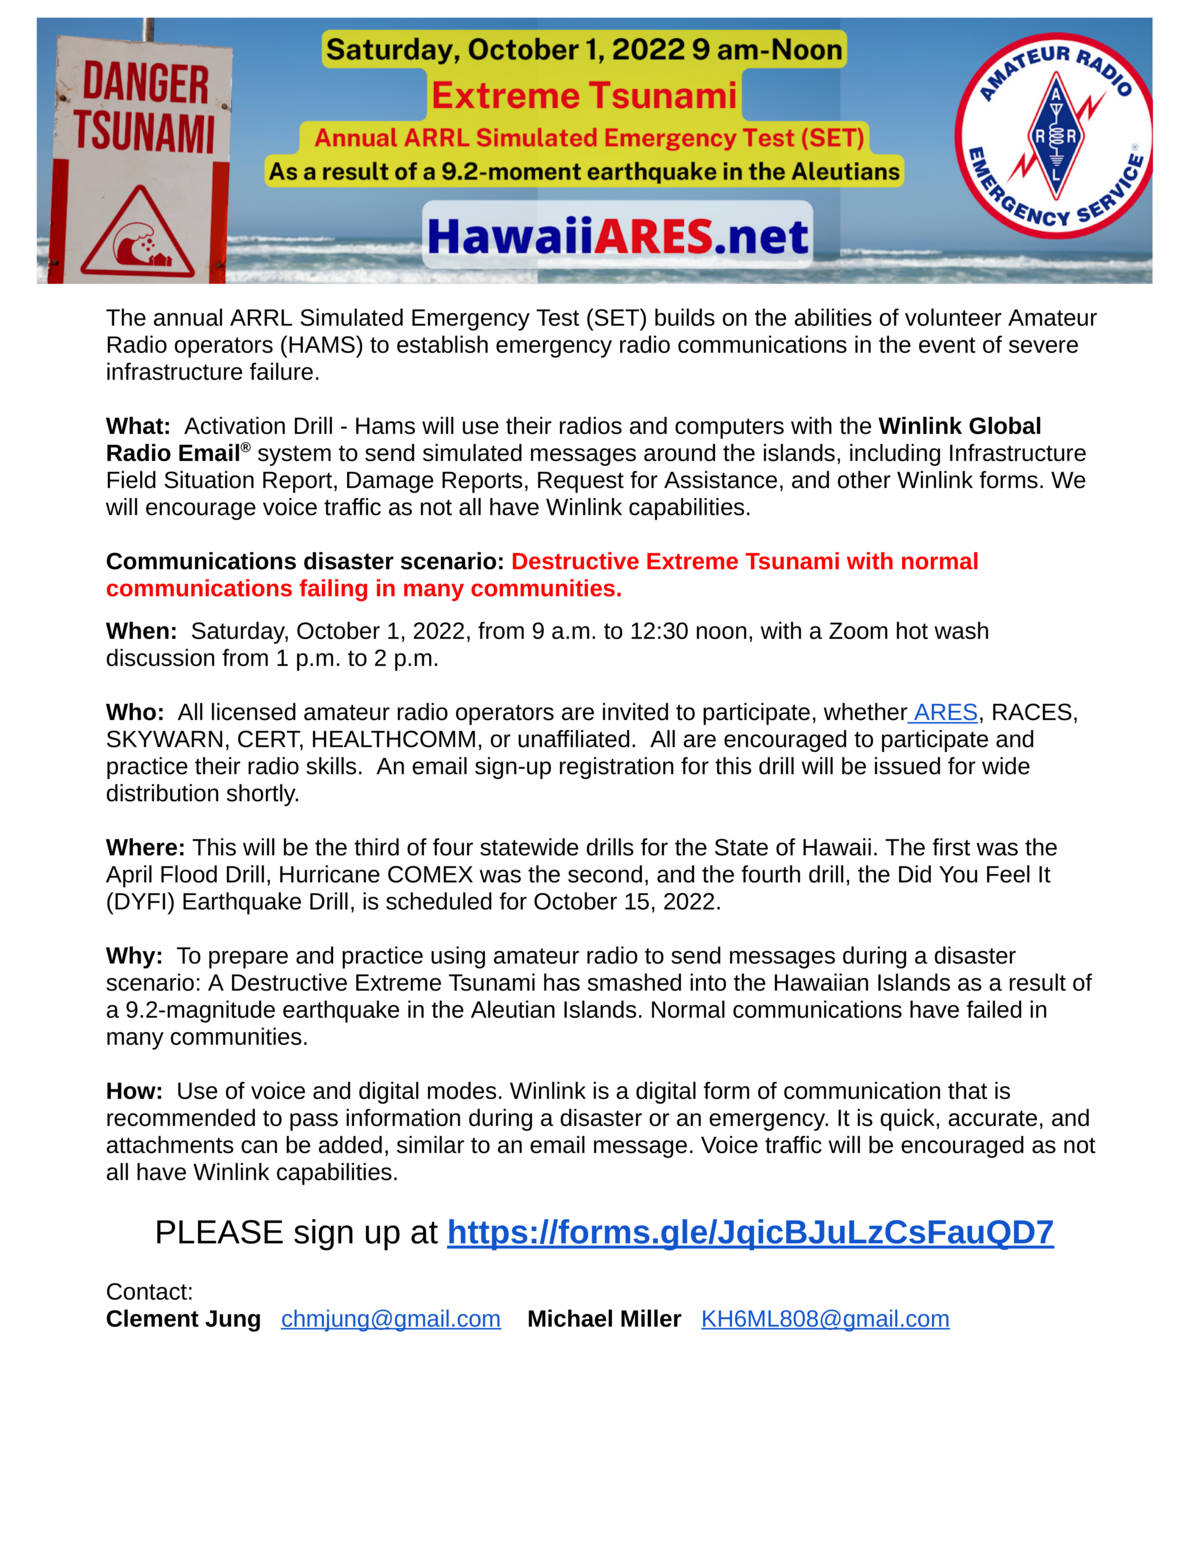 About Hawaii ARES